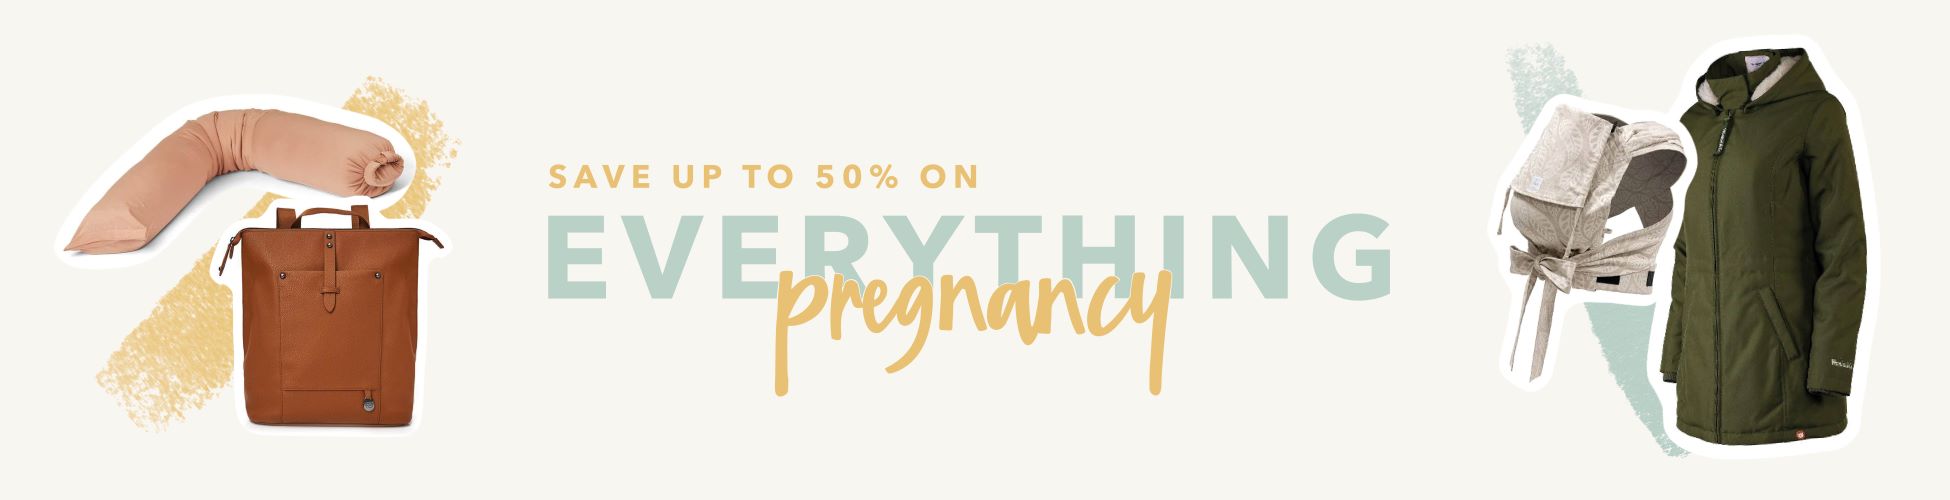 pregnancy-category-banner-9 | Natural Baby Shower